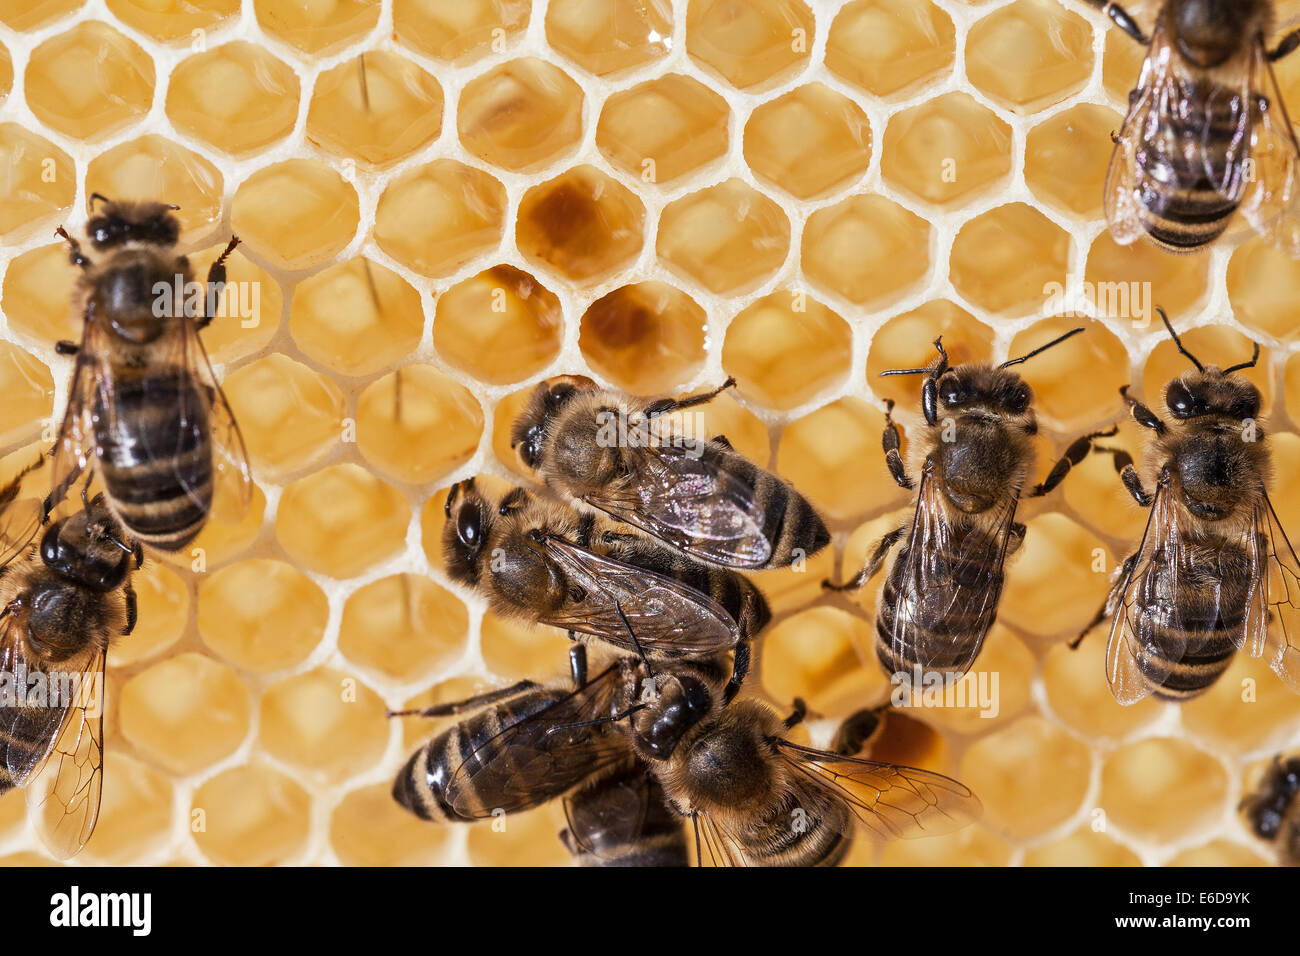 https://c8.alamy.com/comp/E6D9YK/english-worker-honeybees-loading-cells-with-pollen-used-to-make-royal-E6D9YK.jpg